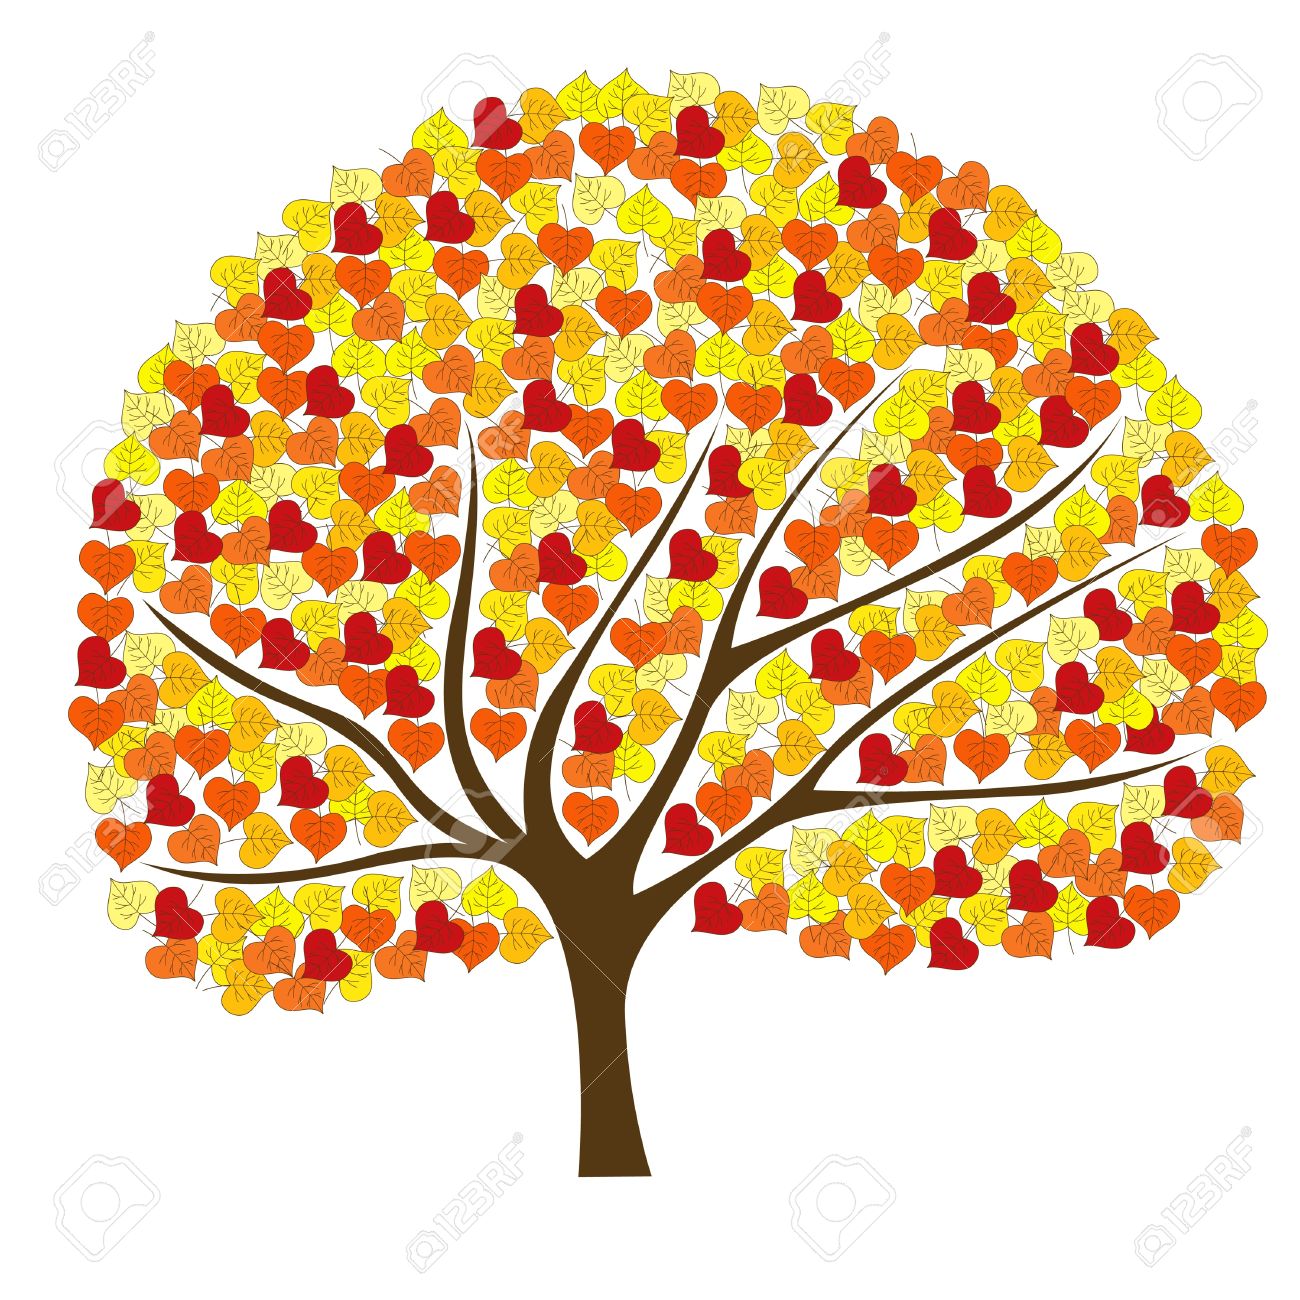 Colorful Fall Tree Clipart.